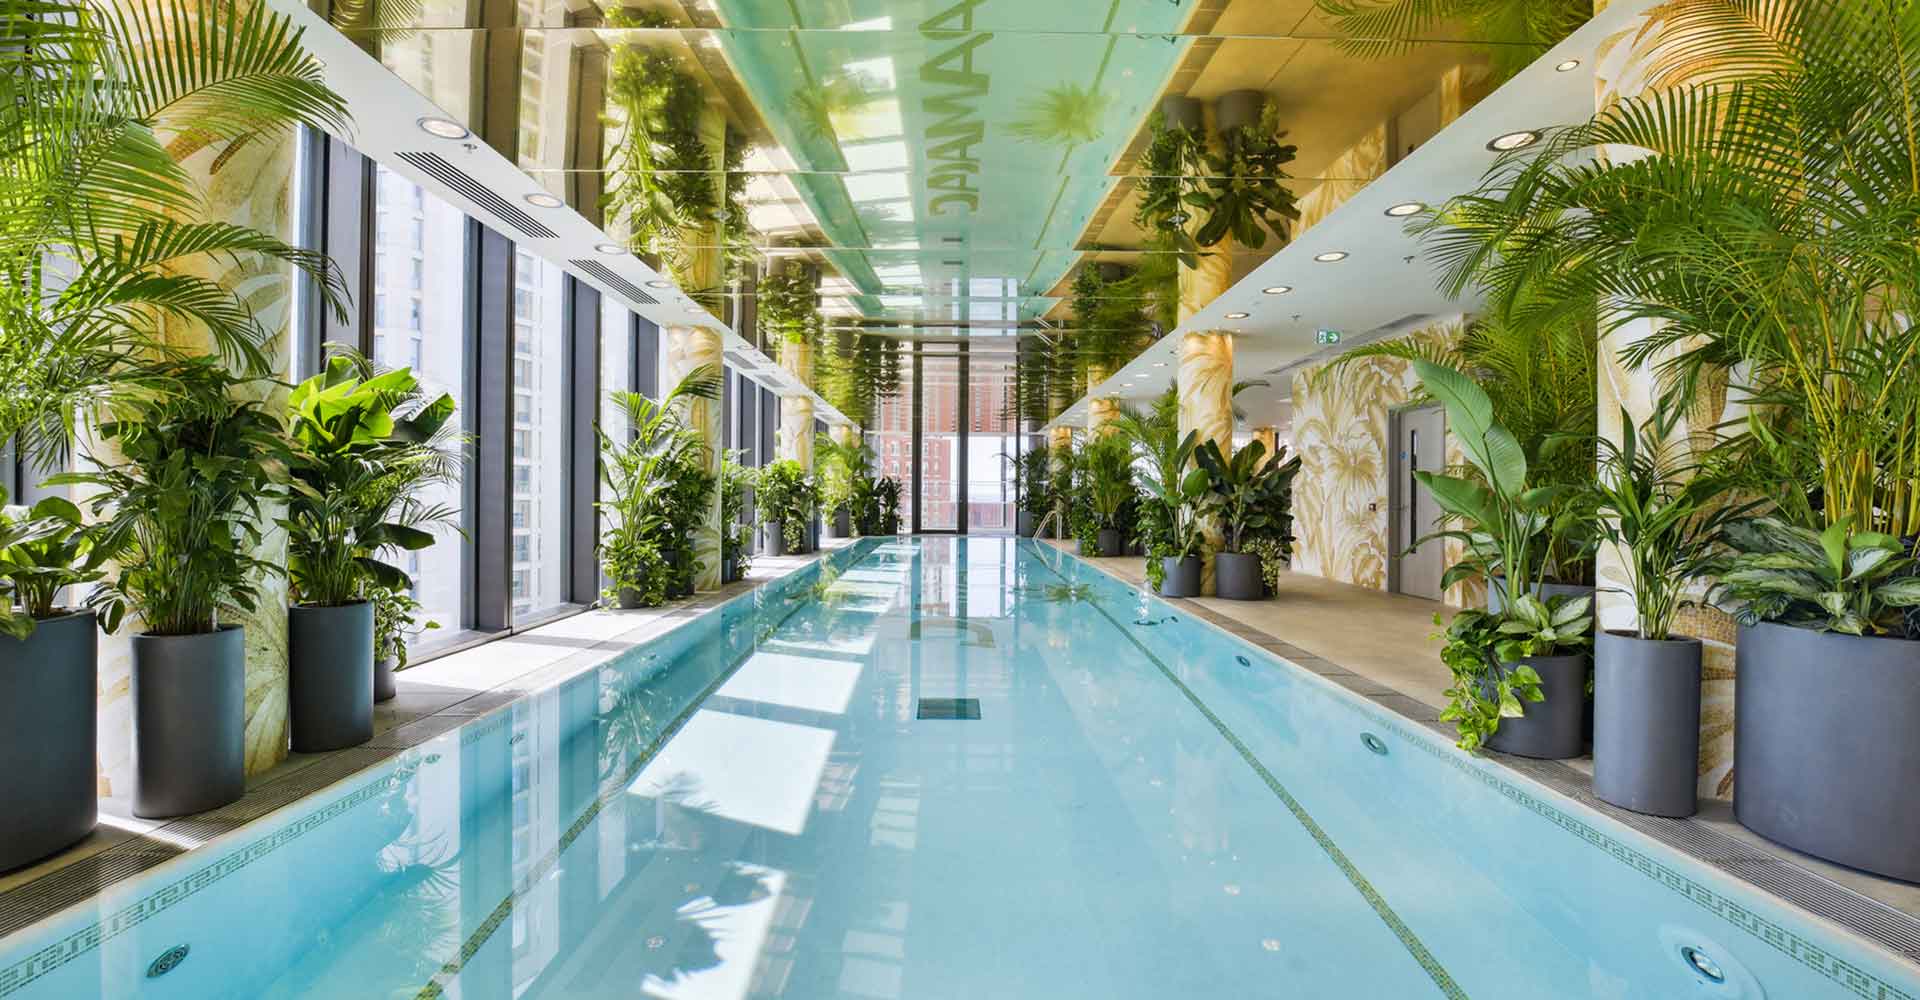 The indoor pool in the Damac Tower